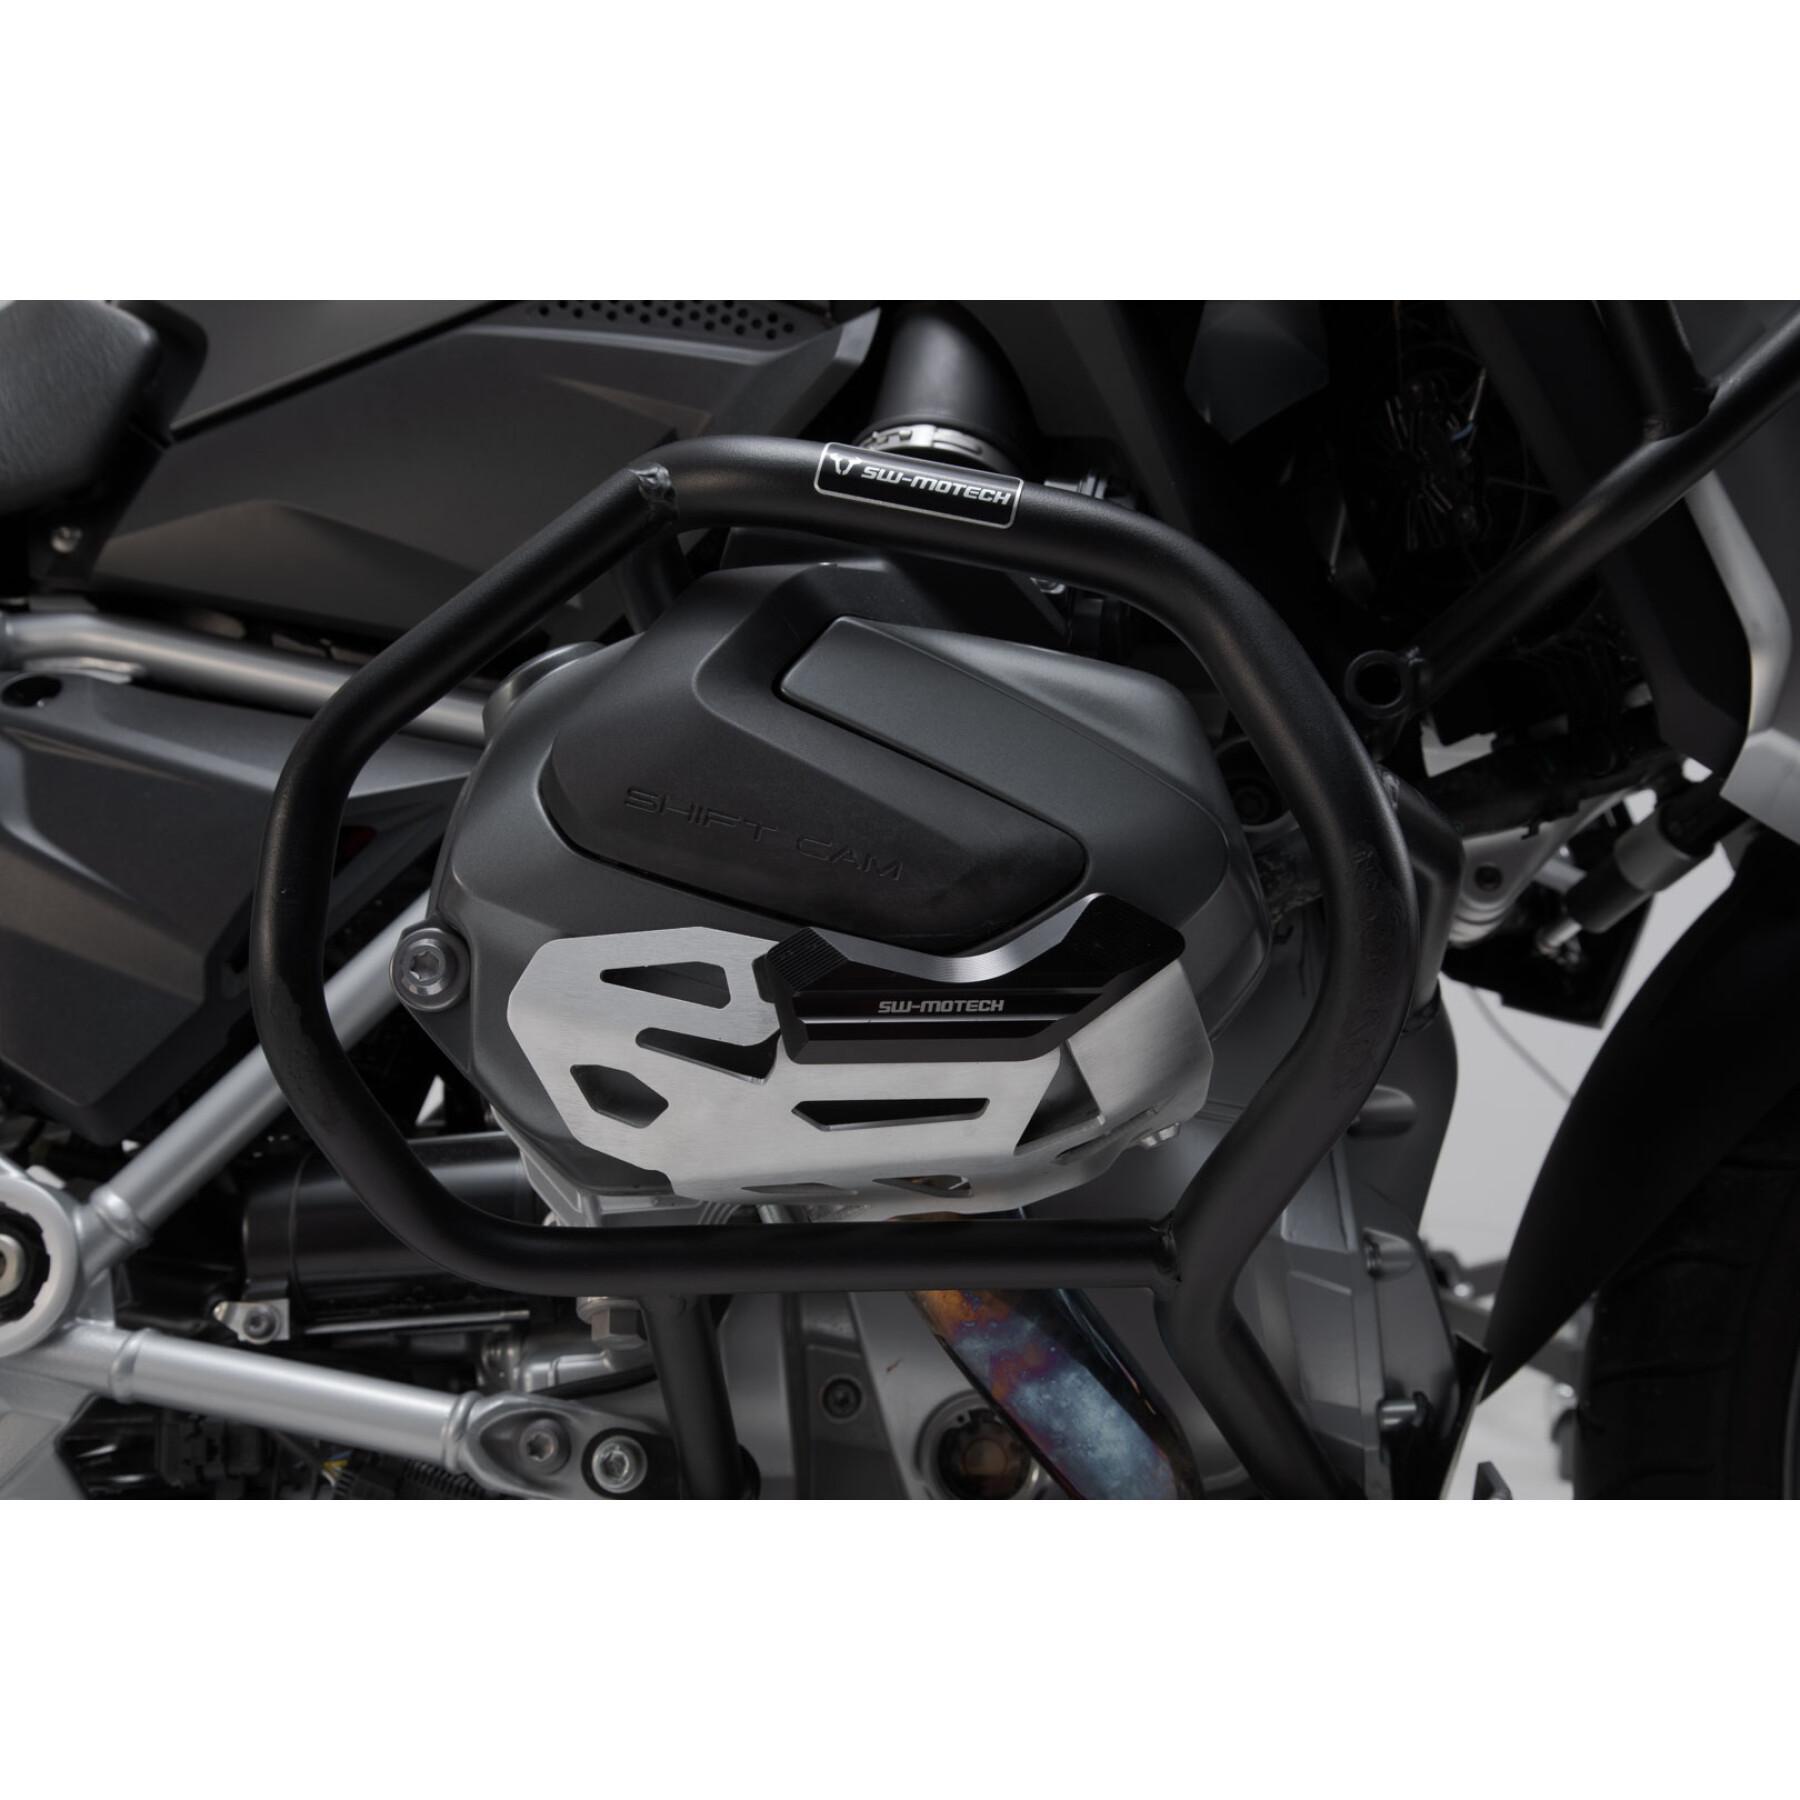 Protection de cylindre SW-Motech /.Bmw R 1250 GS/Adv, R 1250 RS/ RT.